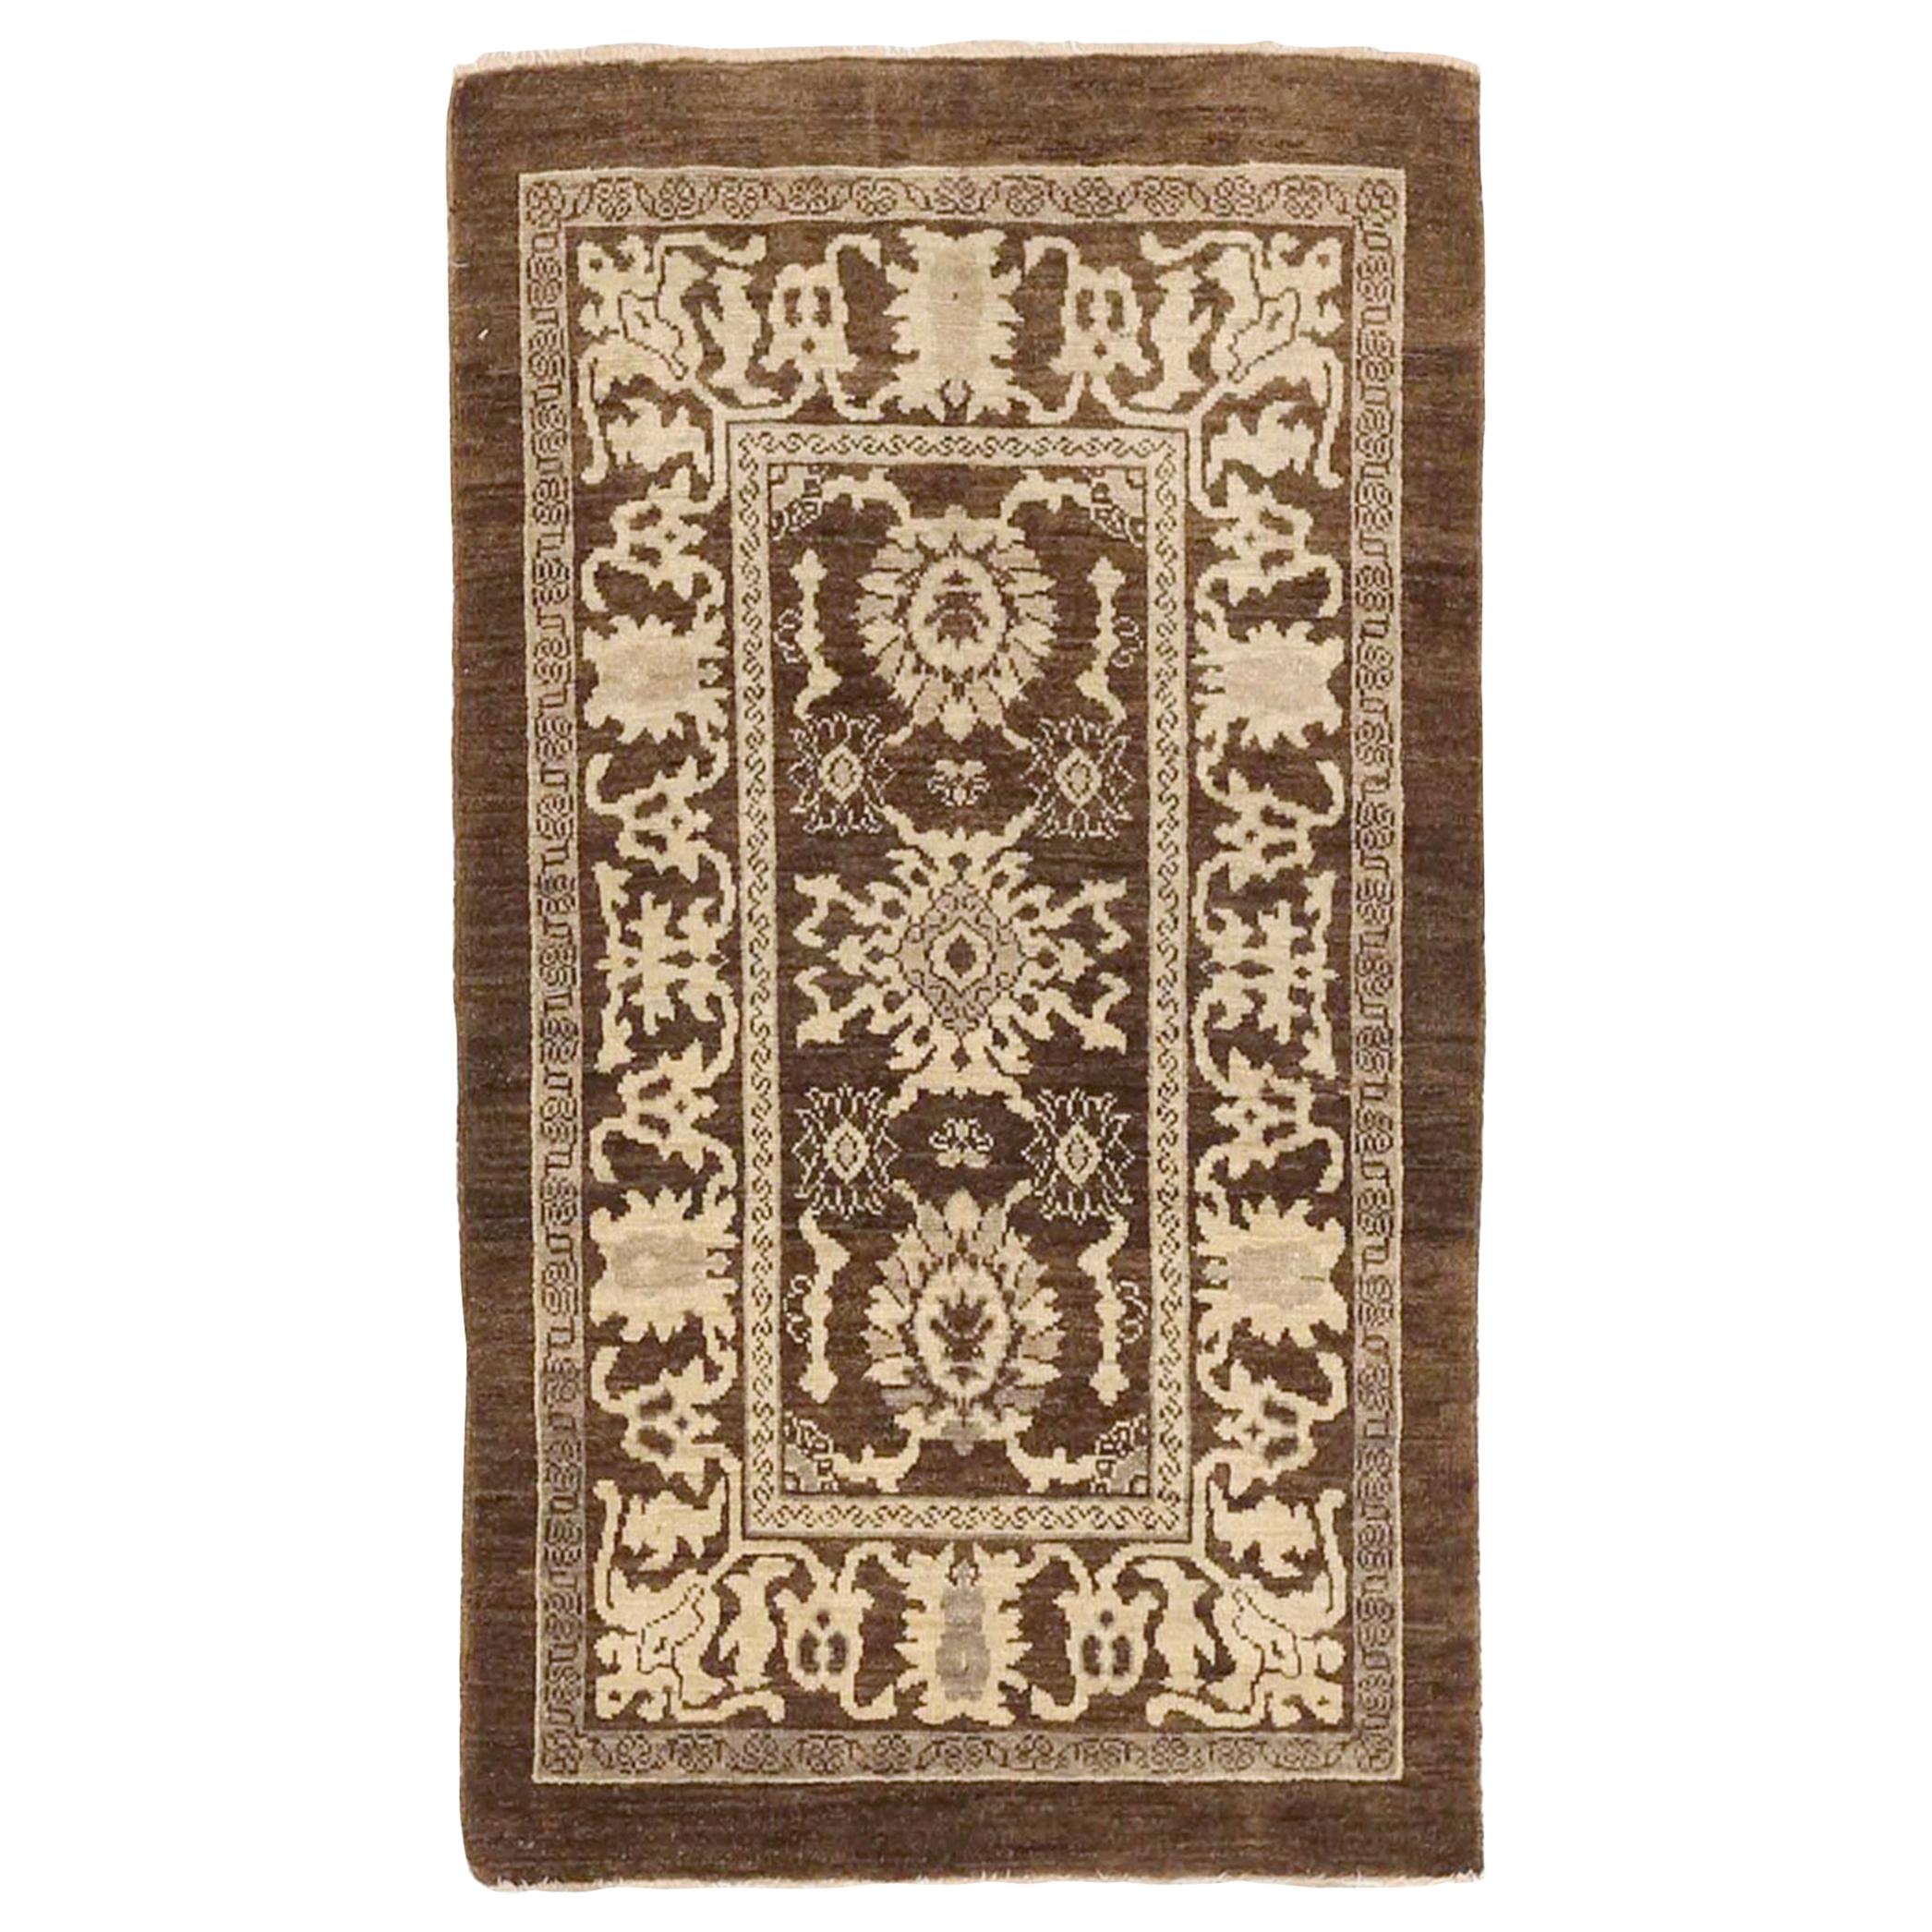 New Persian Sultanabad Rug with Ivory and Gray Floral Motifs on Brown Field